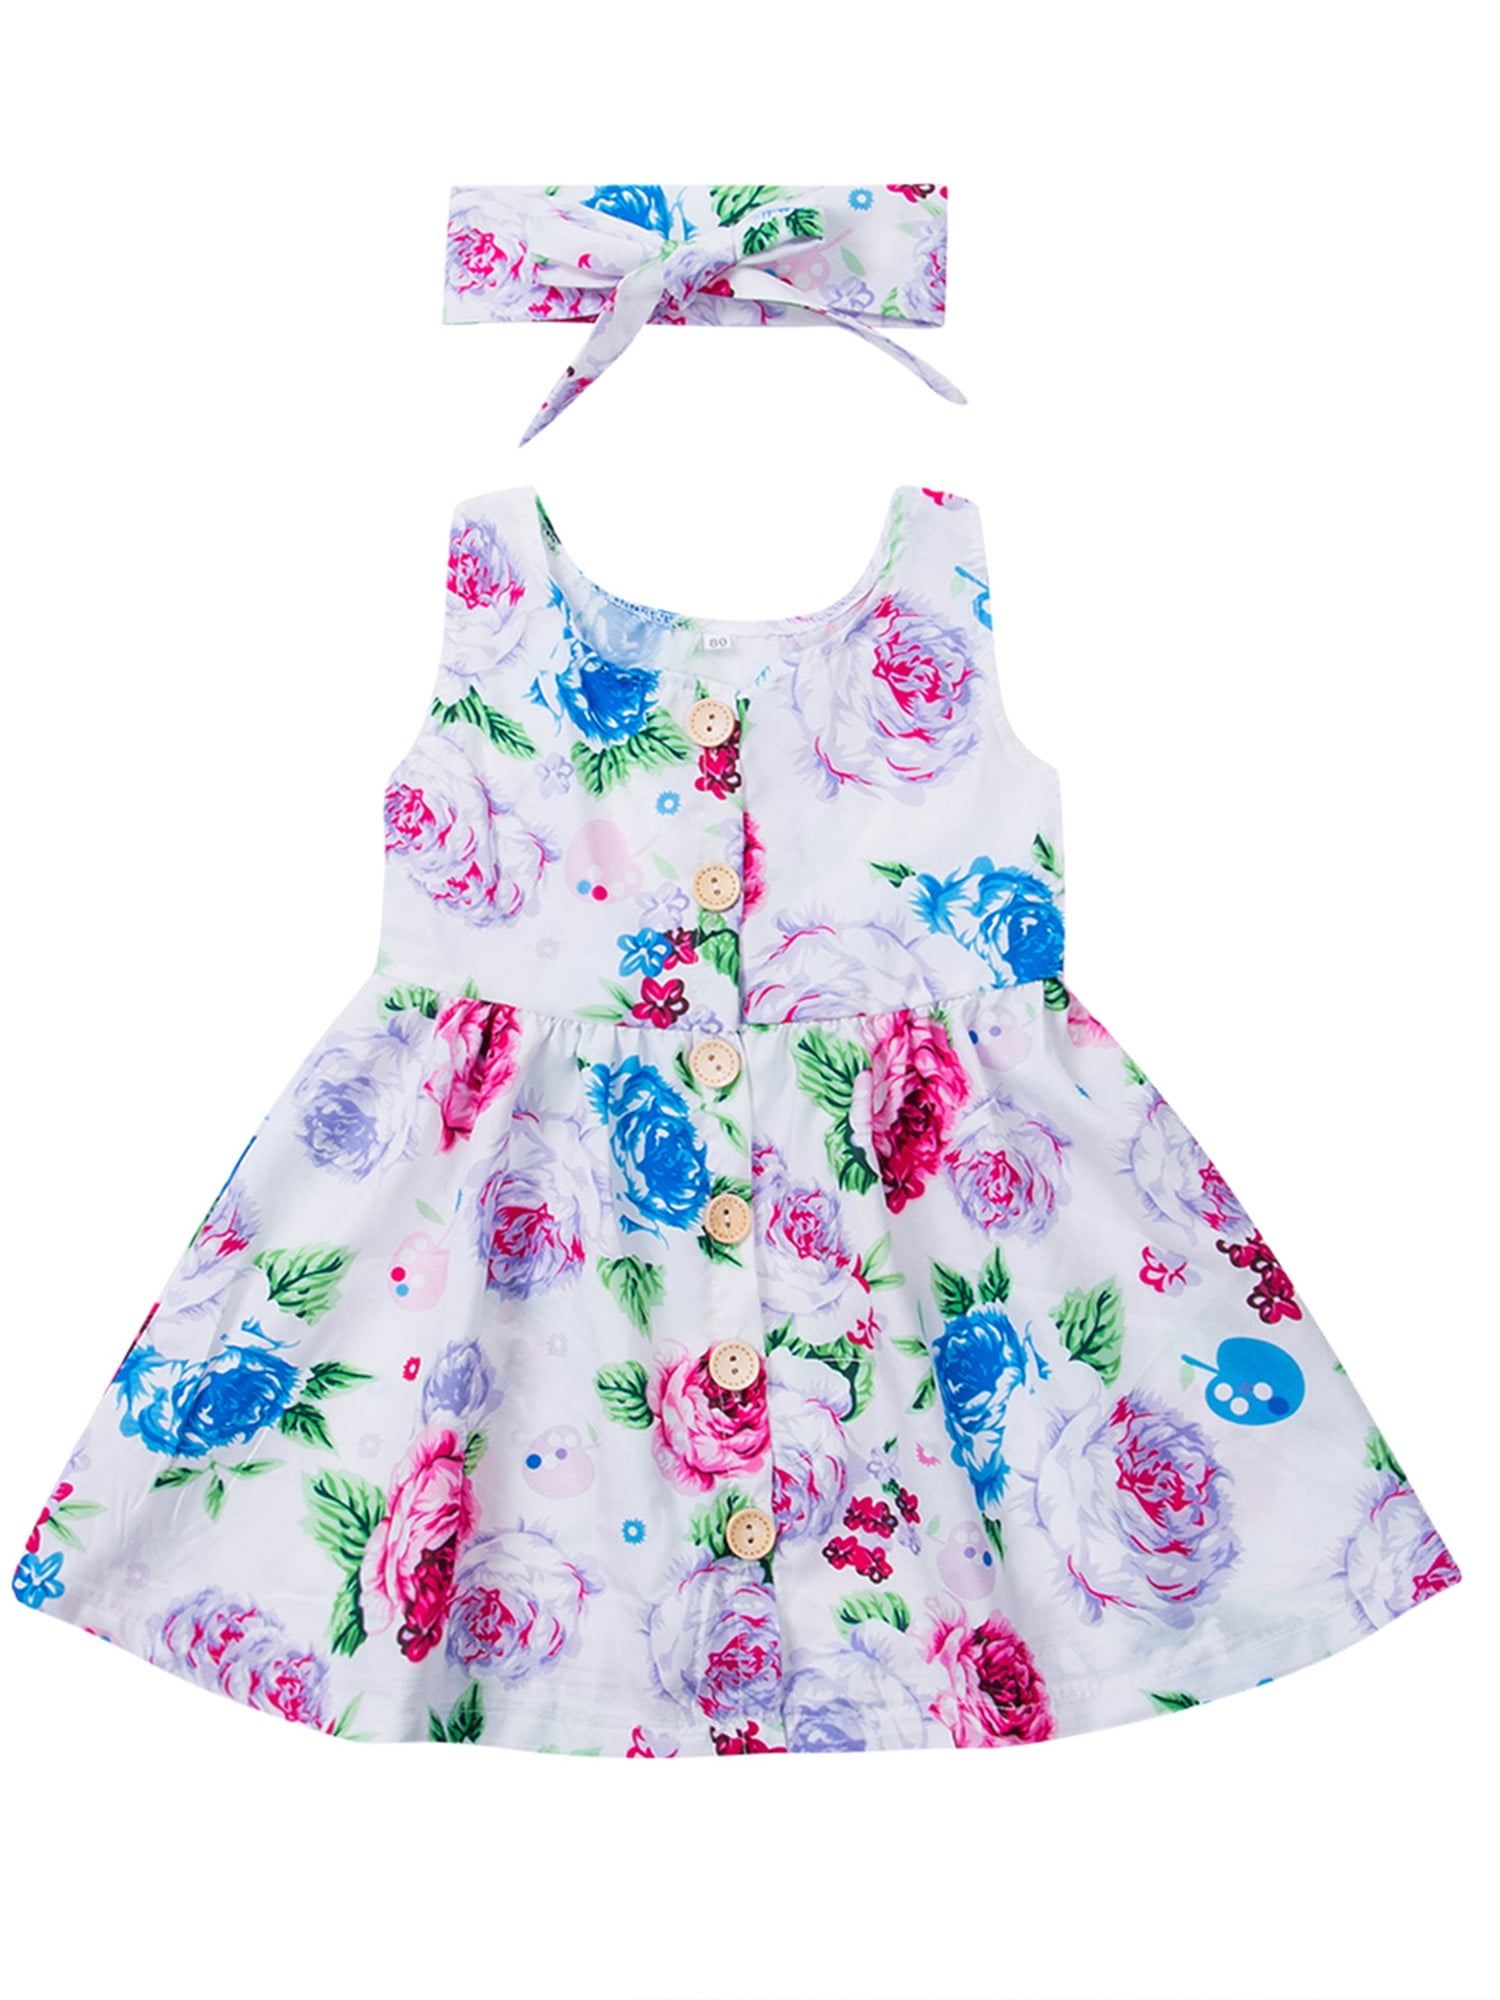 Baby Girl Clothes Fruit Printed Infant Outfit Sleeveless Princess Mini Dress Ur· 